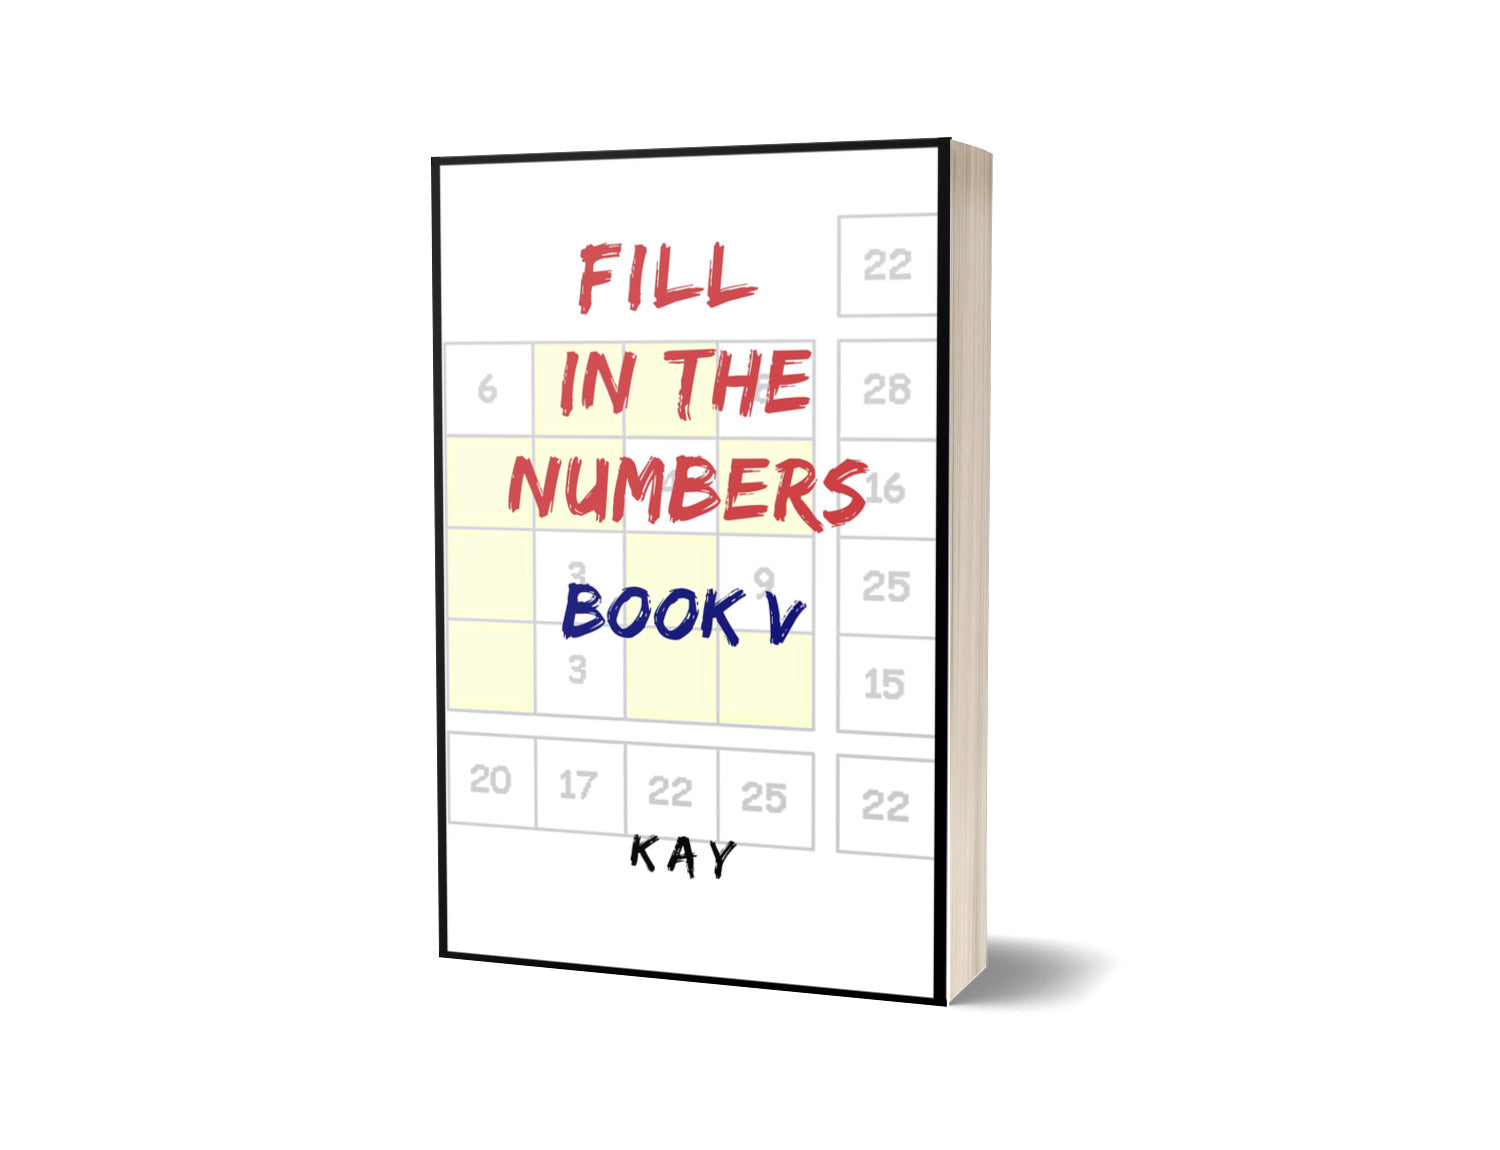 Fill in the Numbers Book V